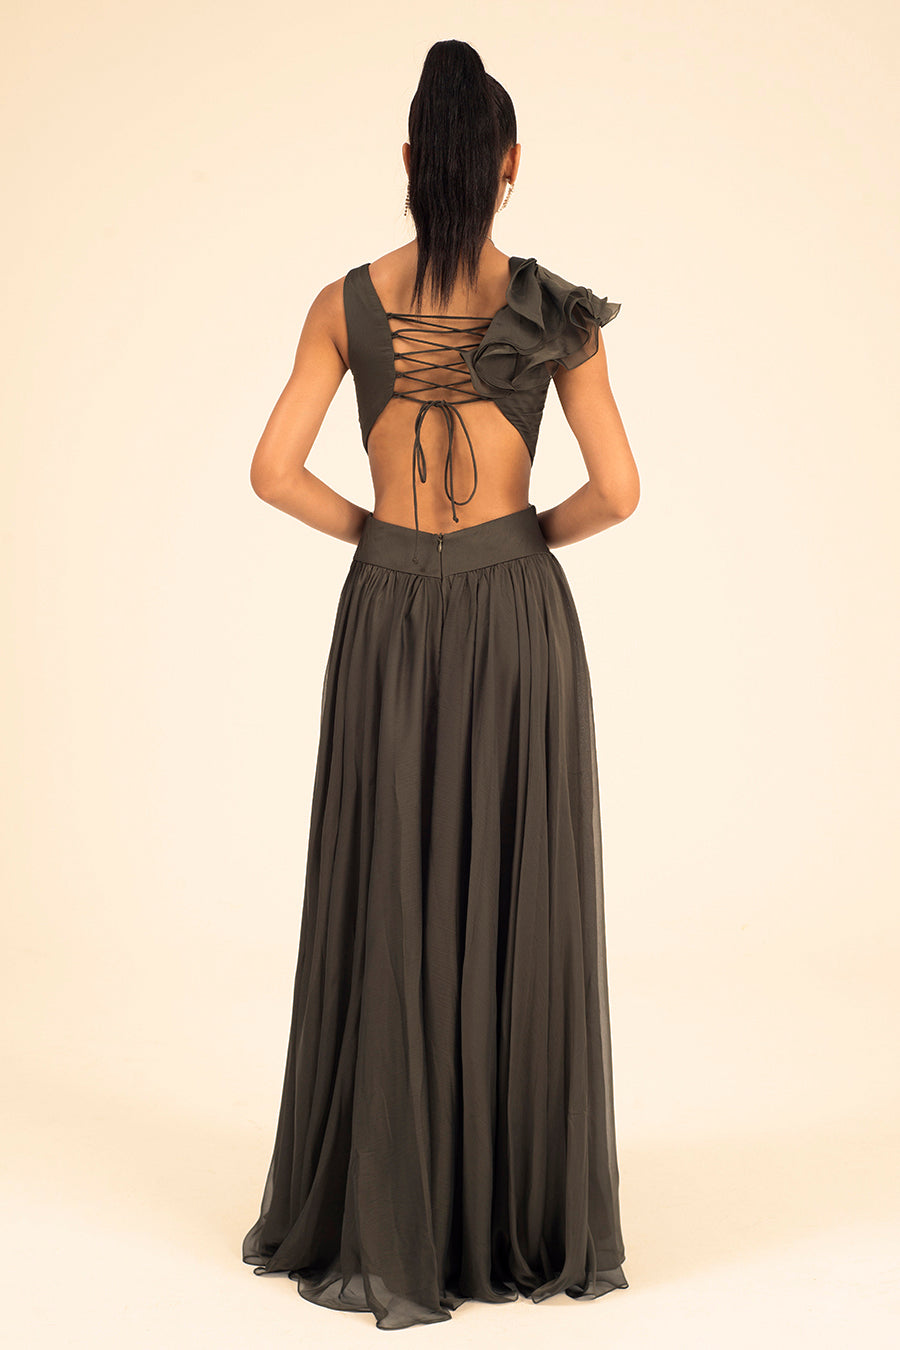 Rayan - Mystic Evenings | Evening and Prom Dresses